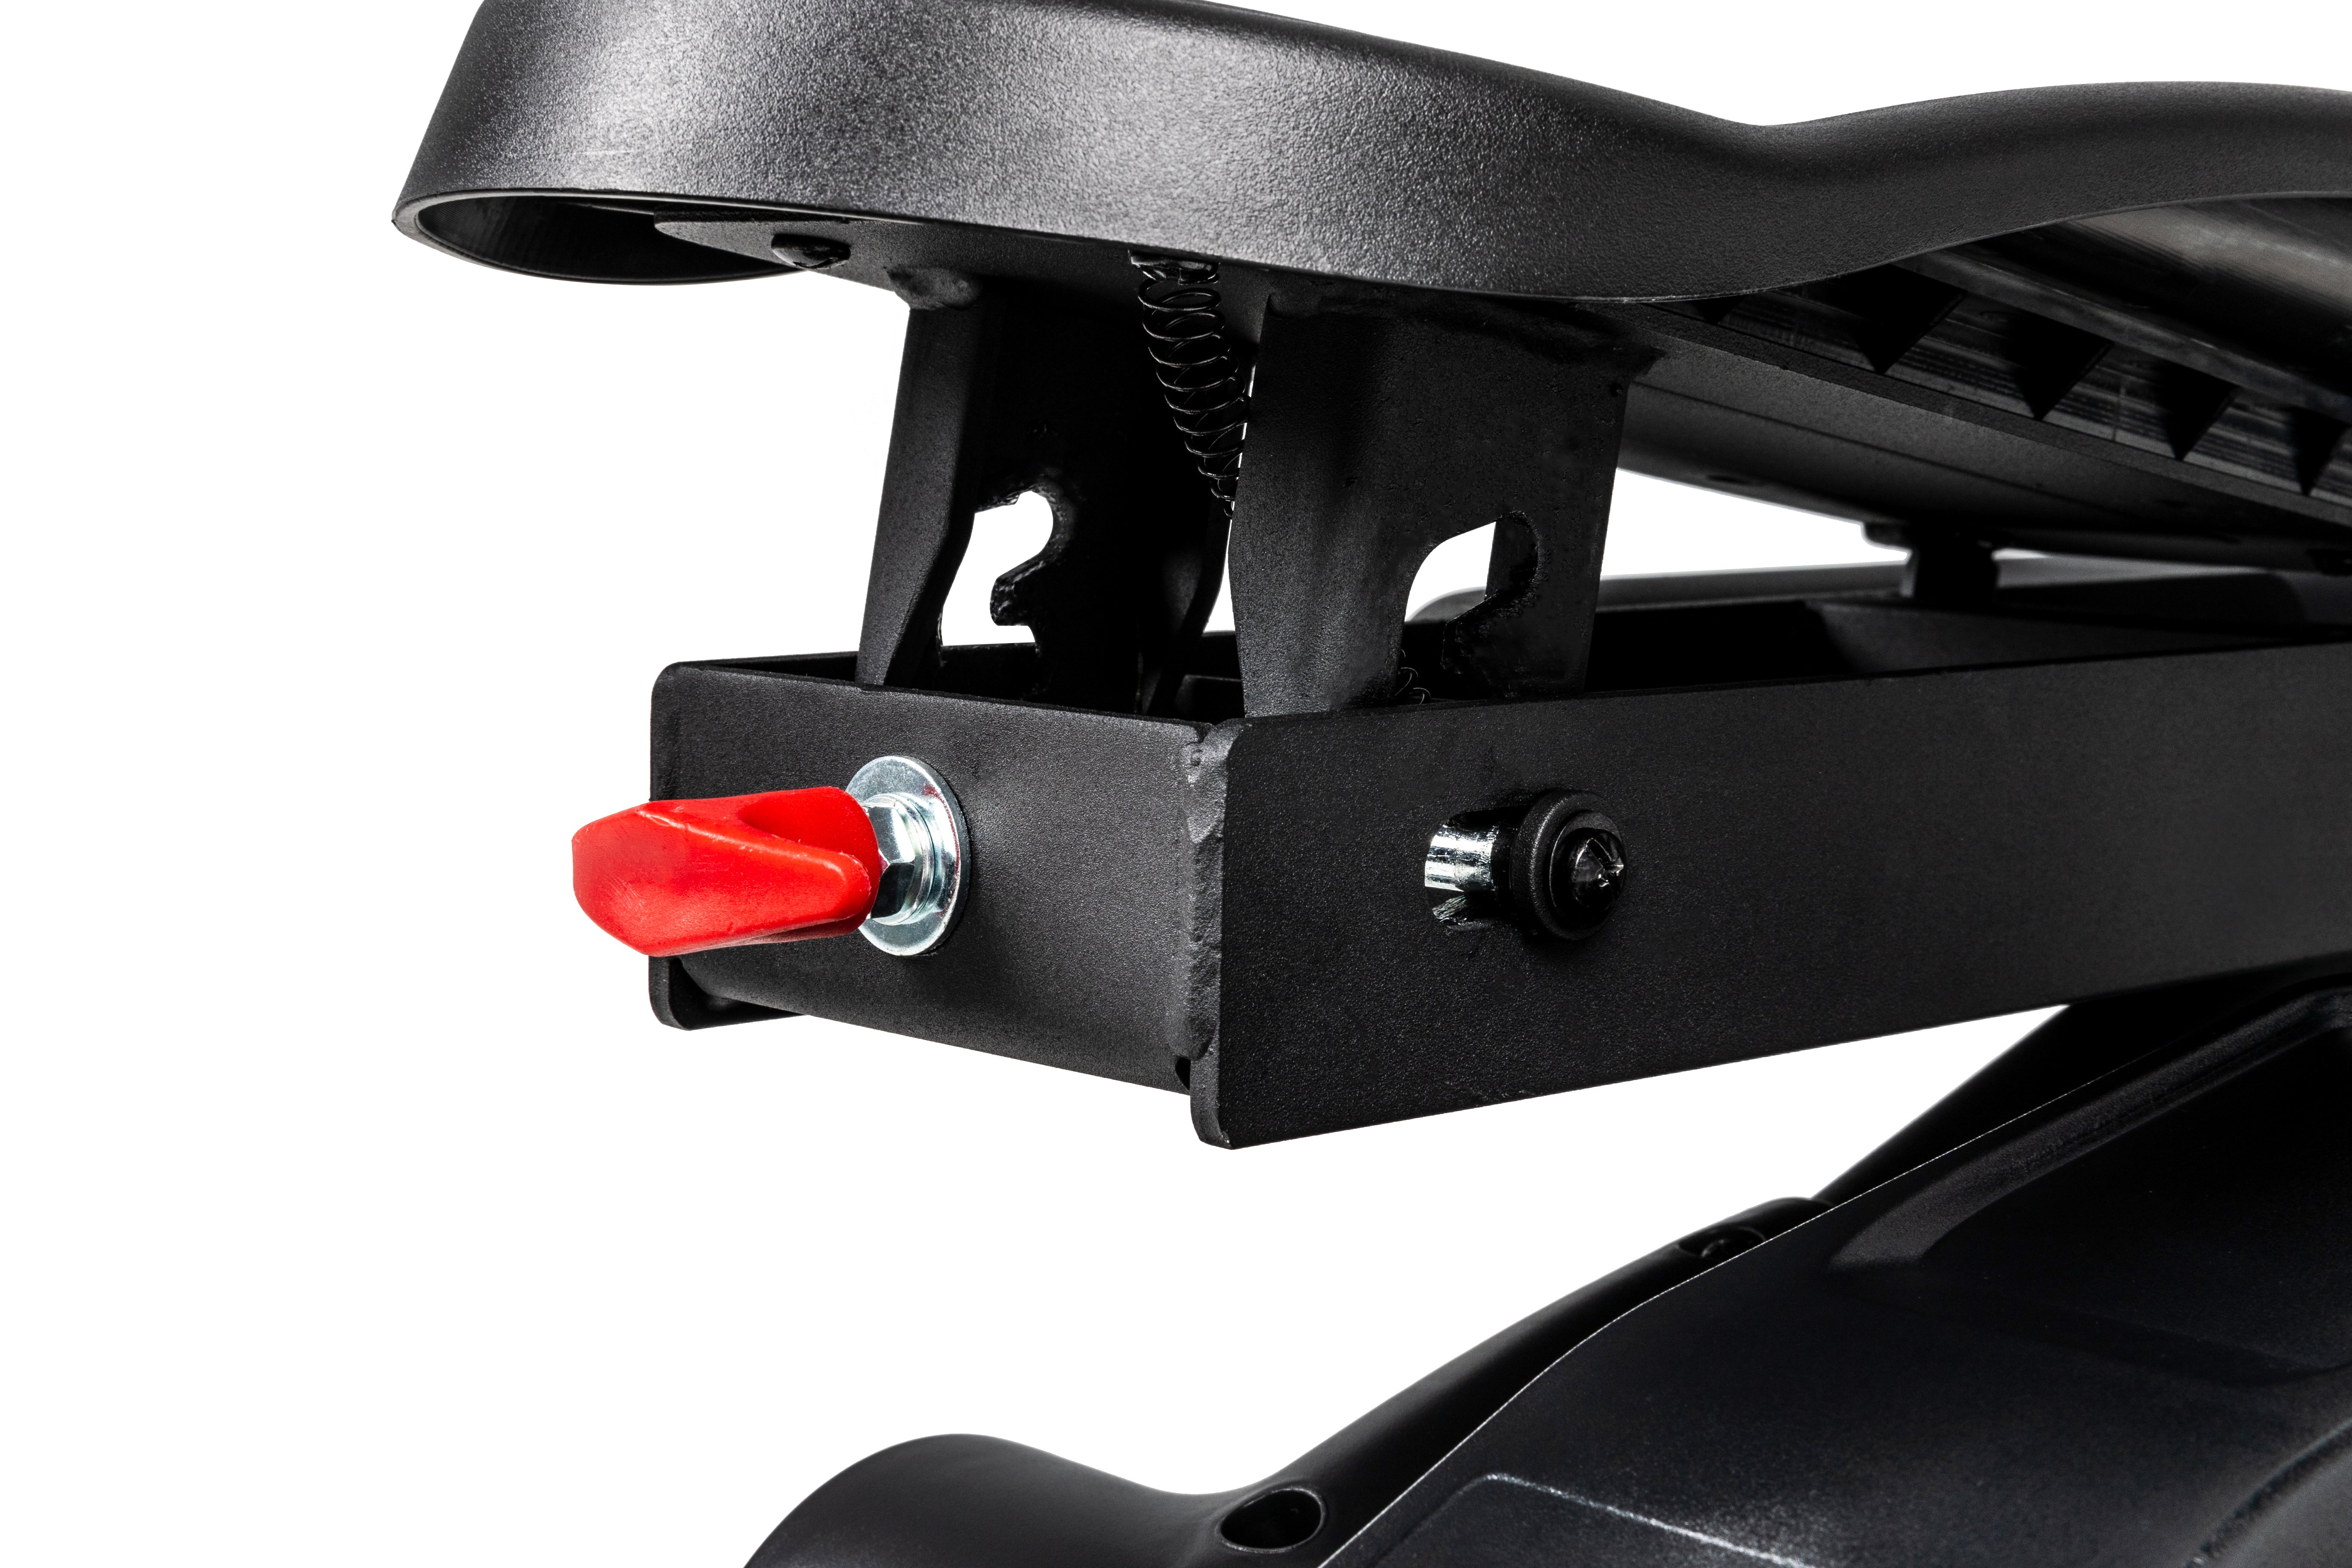 Detailed view of the Sole E35 elliptical trainer's pedal mechanism, showcasing a red adjustment knob, spring, and various bolts.